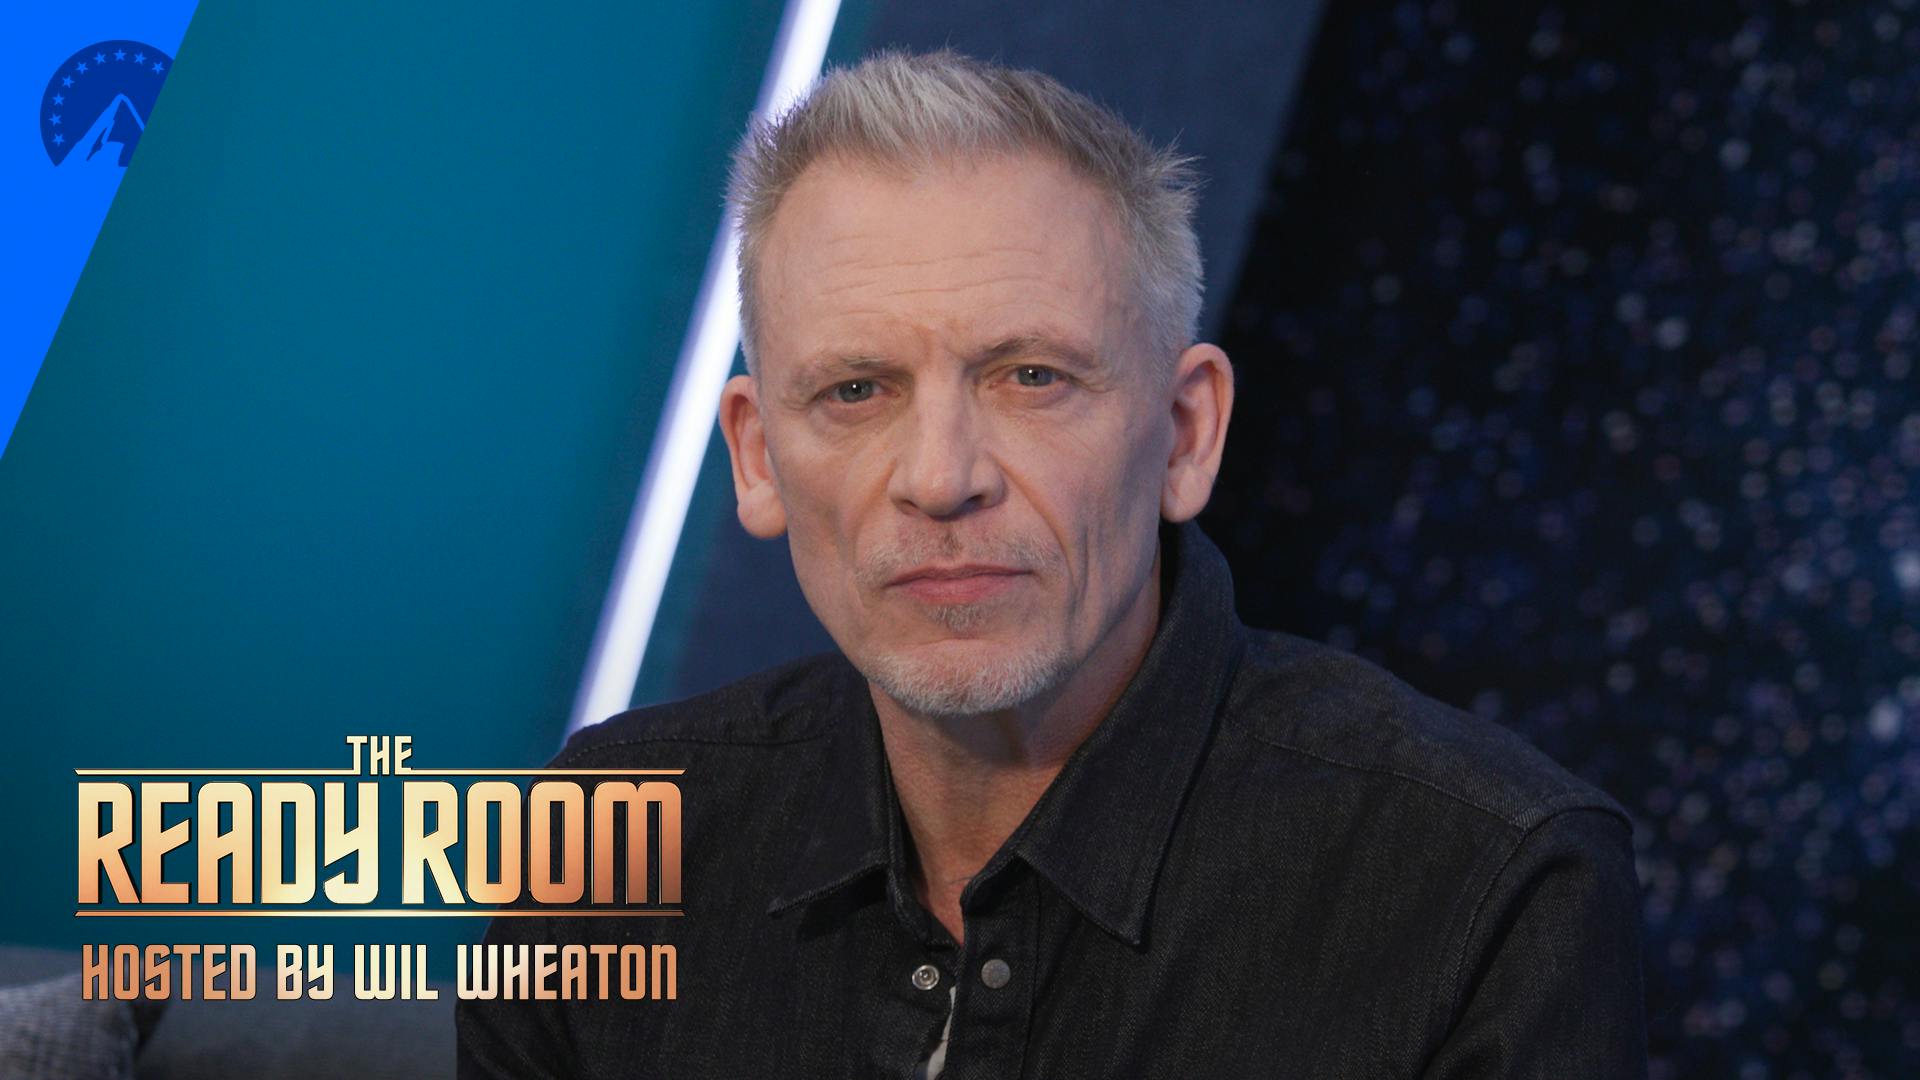 Callum Keith Rennie visits The Ready Room to discuss Star Trek: Discovery 